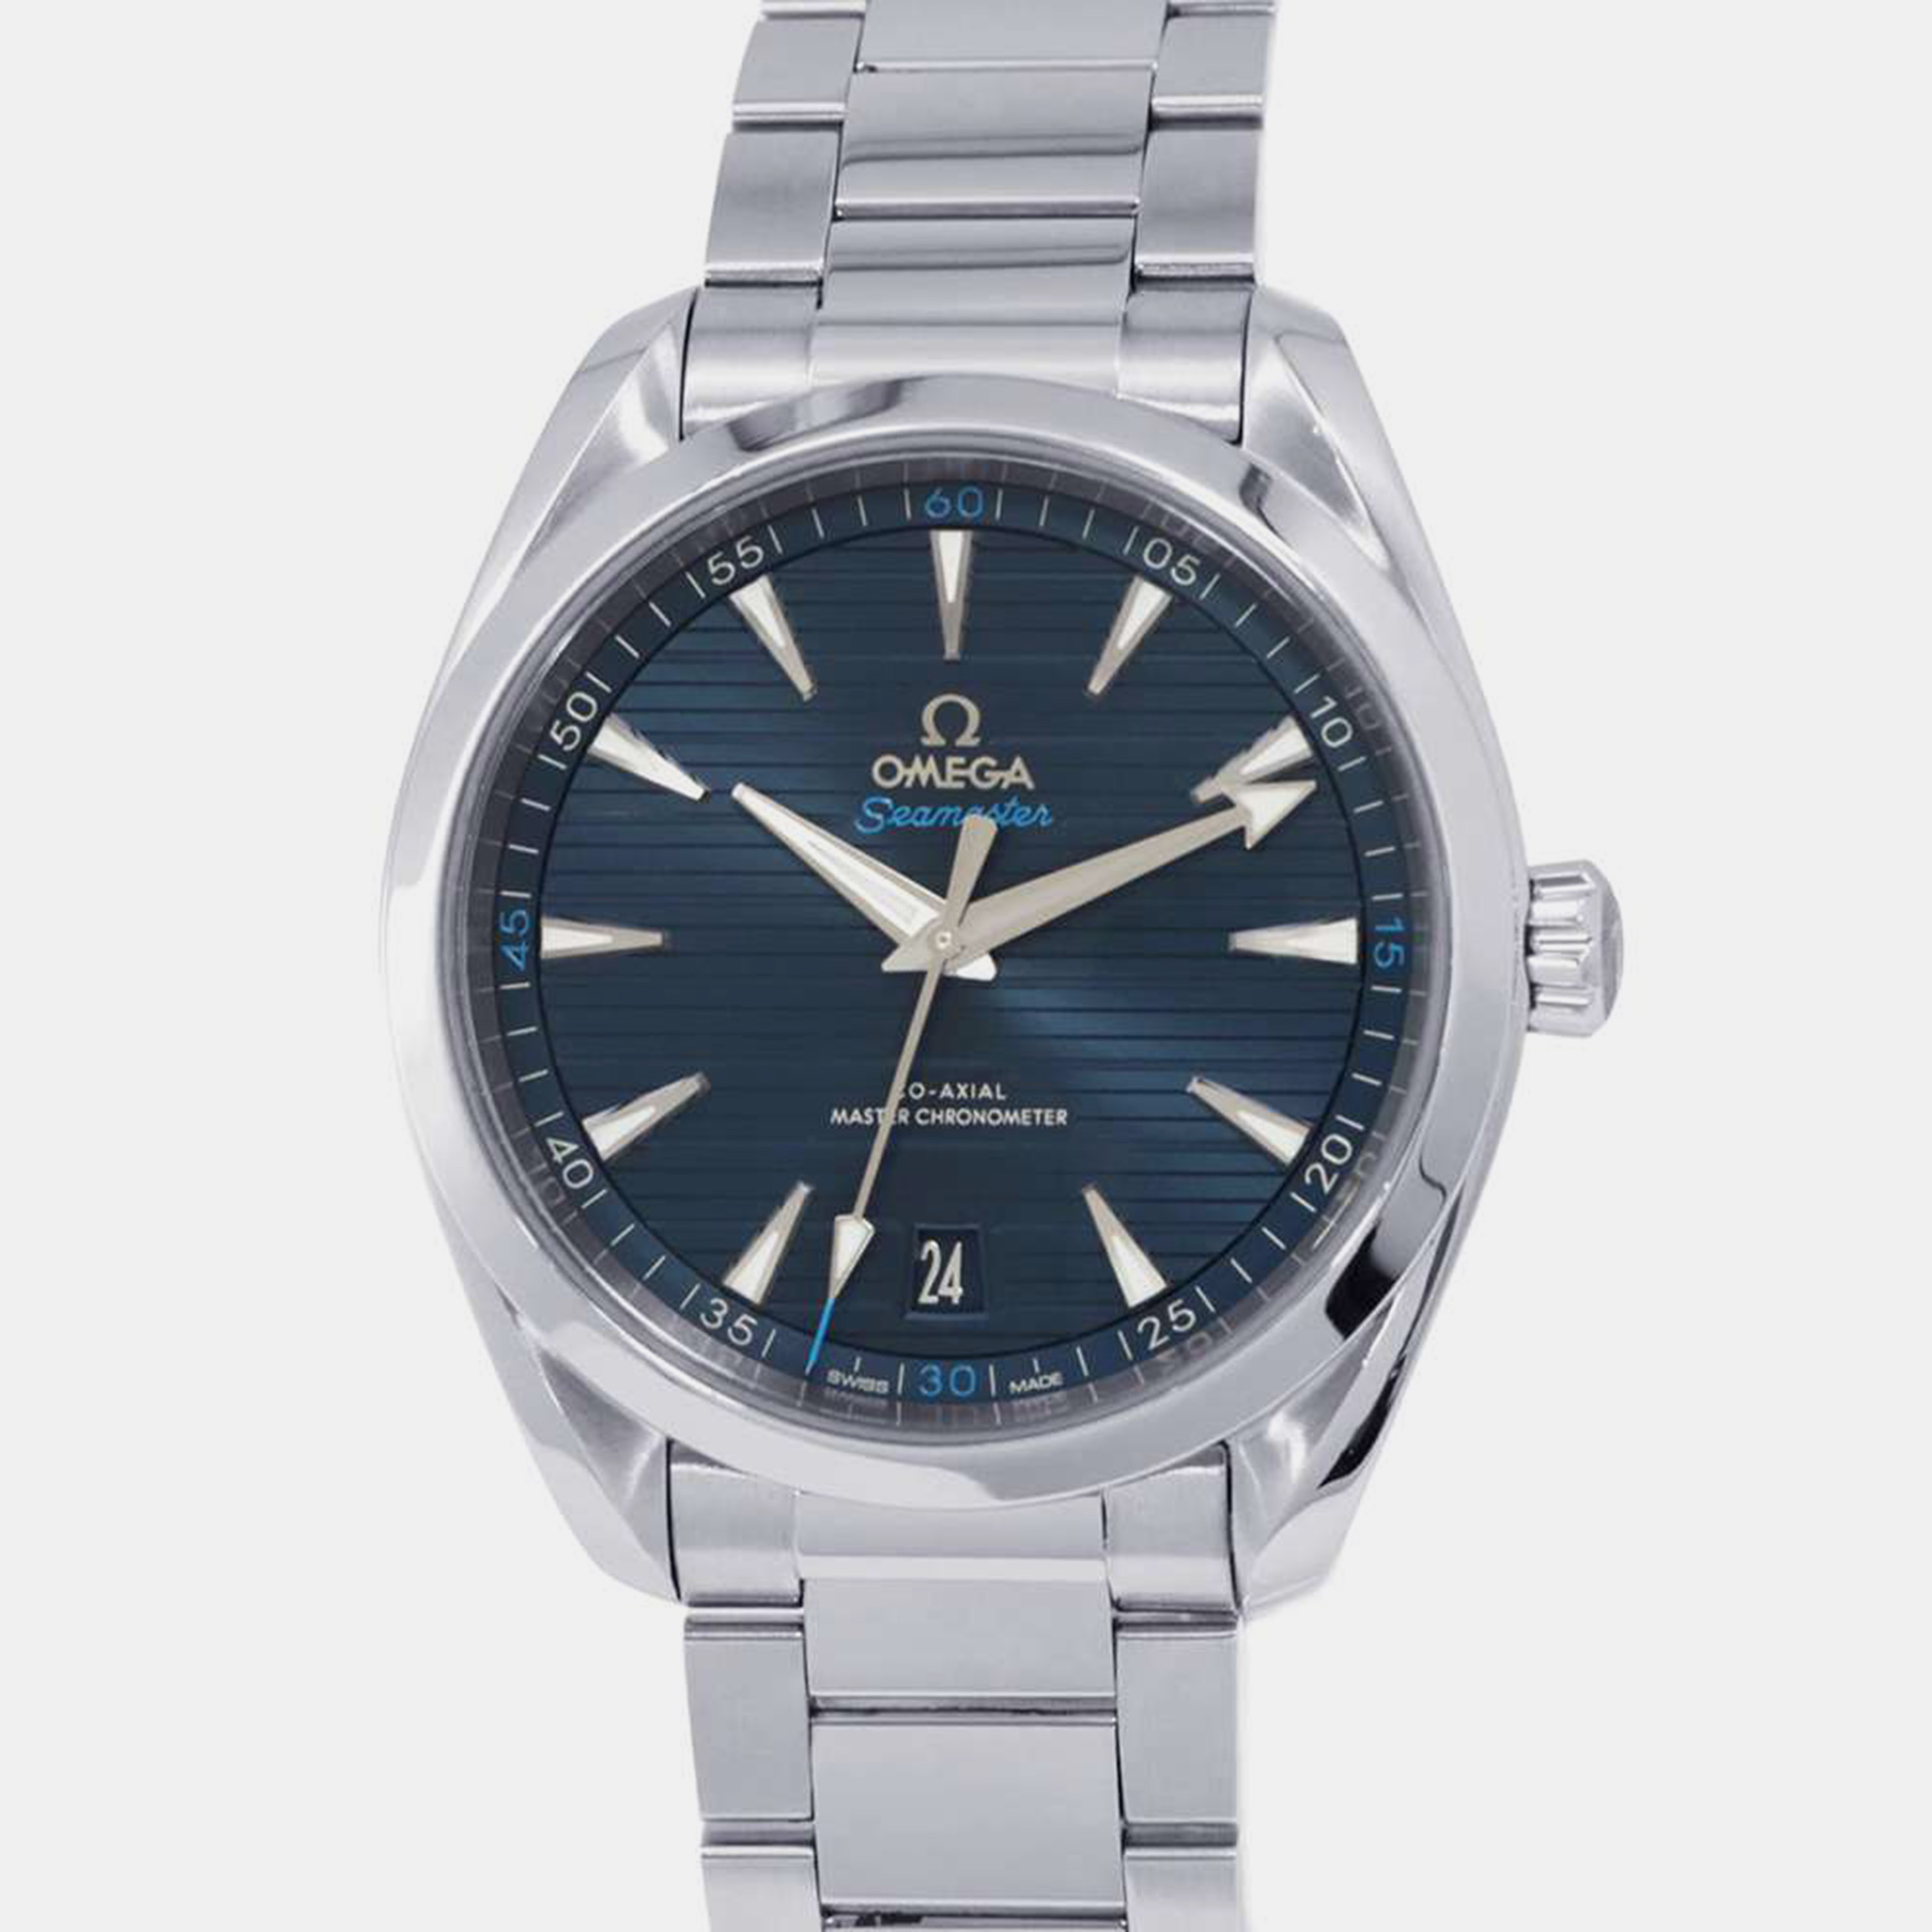 A classy silhouette made of high quality materials and packed with precision and luxury makes this authentic Omega wristwatch the perfect choice for a sophisticated finish to any look. It is a grand creation to elevate the everyday experience.